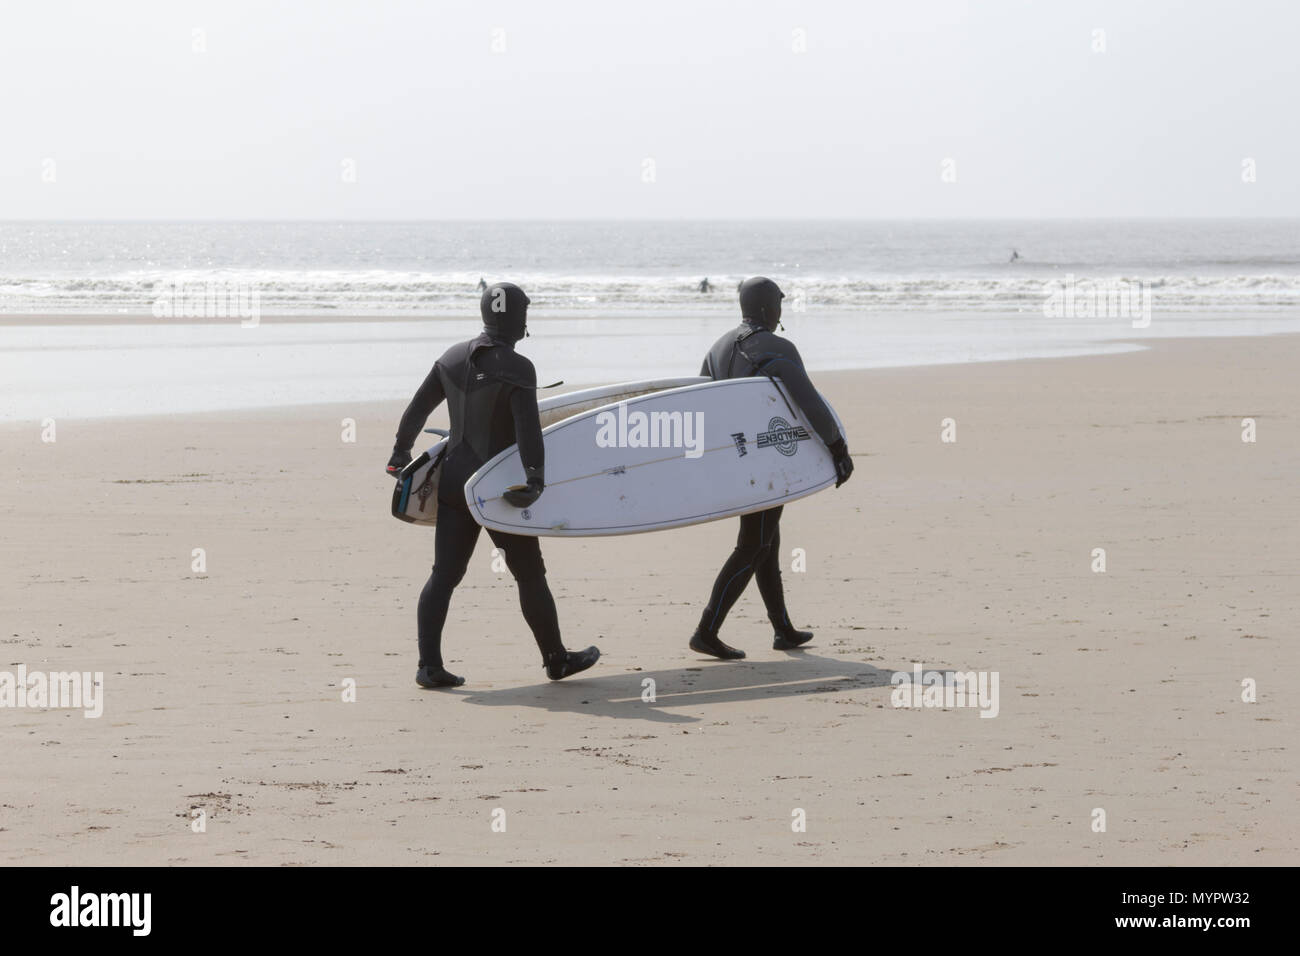 Surfers on the Beach, Porthcawl, Mid Glamorgan, Wales, UK. 14th April 2018. UK. UK Weather. Surfers on the beach preparing to surf on a sunny day. Stock Photo